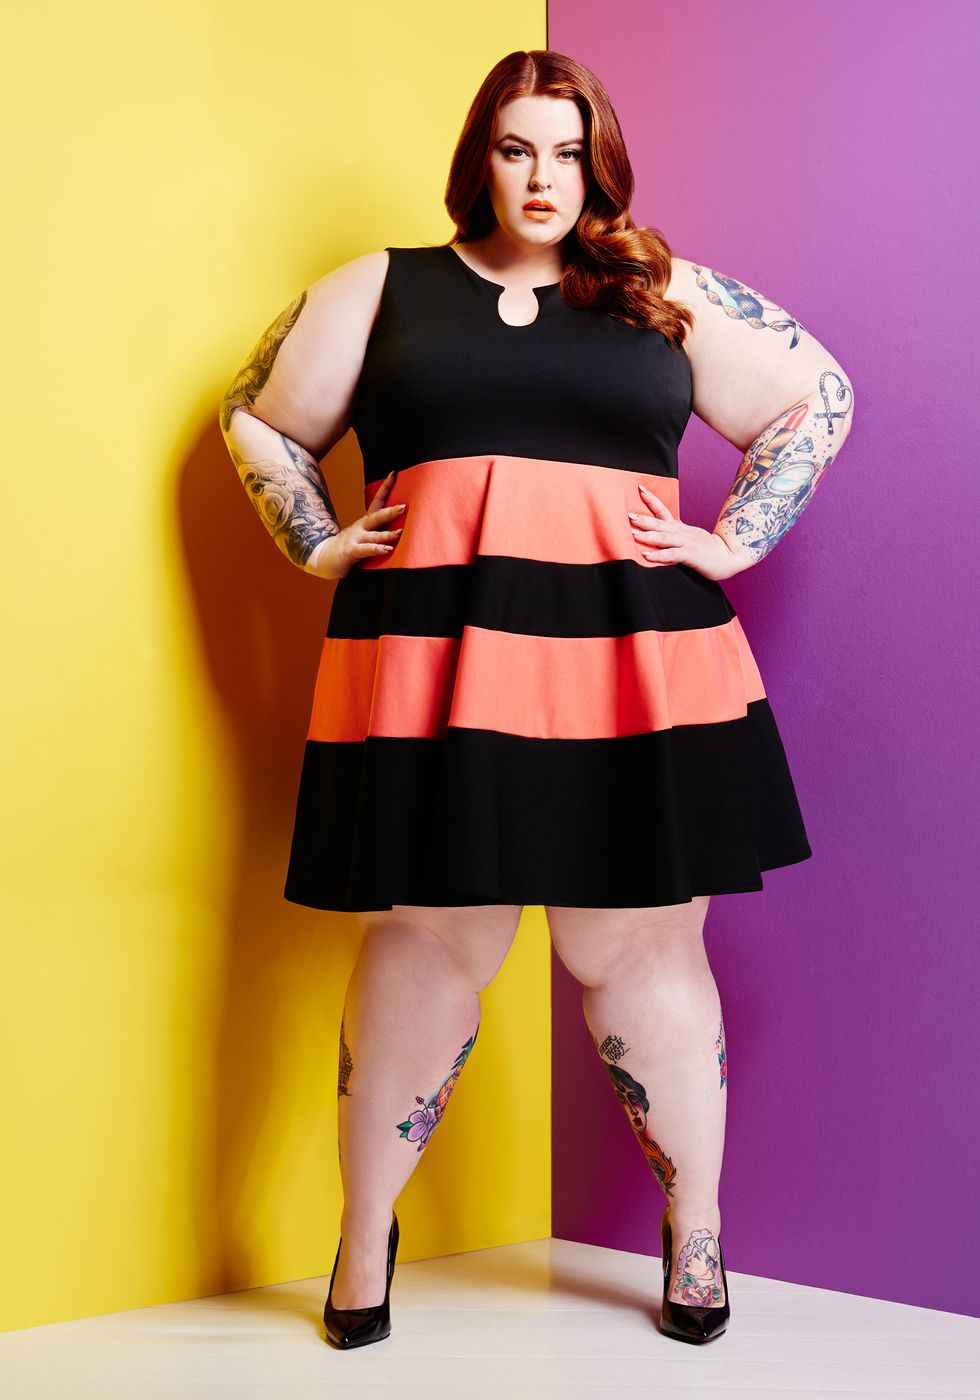 Tess Holliday modelling the new Yours Clothing range